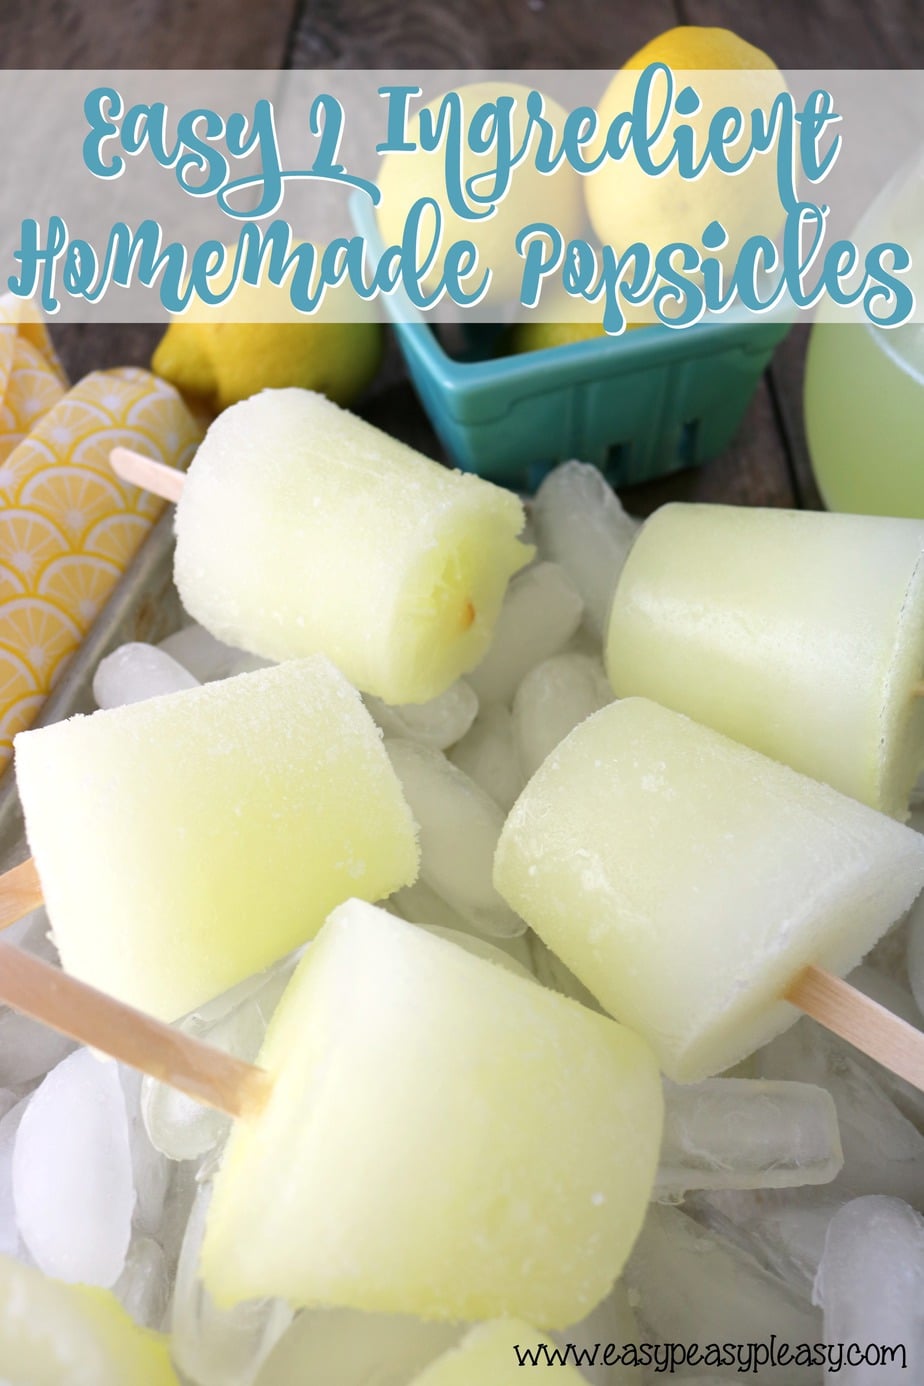 Y'all won't believe how easy these 2 Ingredient Homemade Popsicles are to make. You only need 3 items and some freezer space. Your kids will love these.